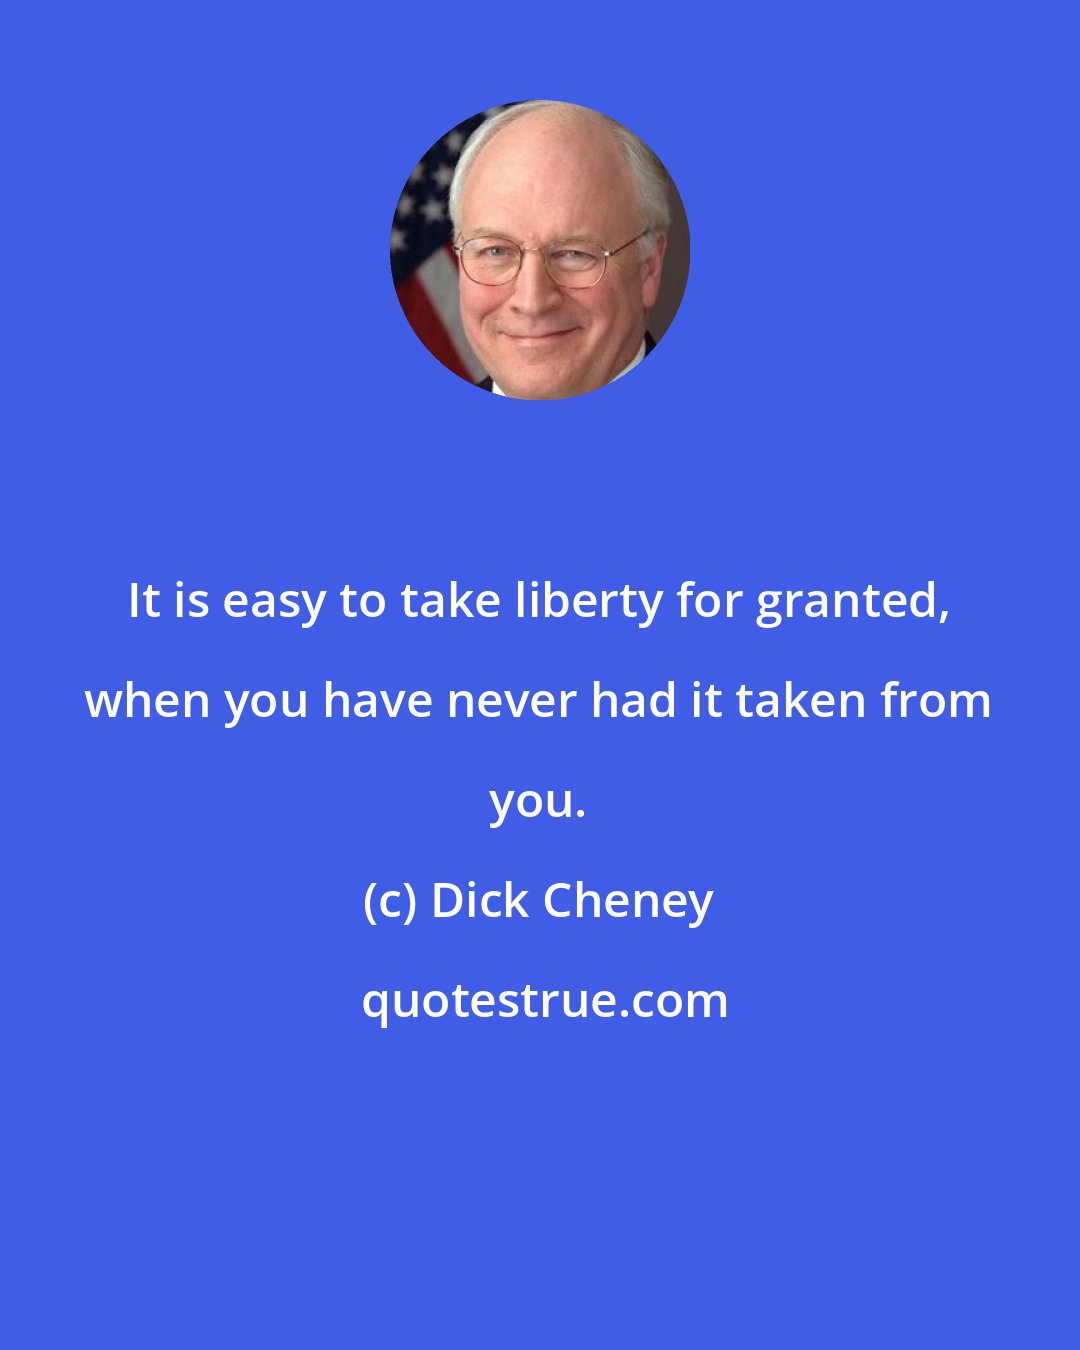 Dick Cheney: It is easy to take liberty for granted, when you have never had it taken from you.